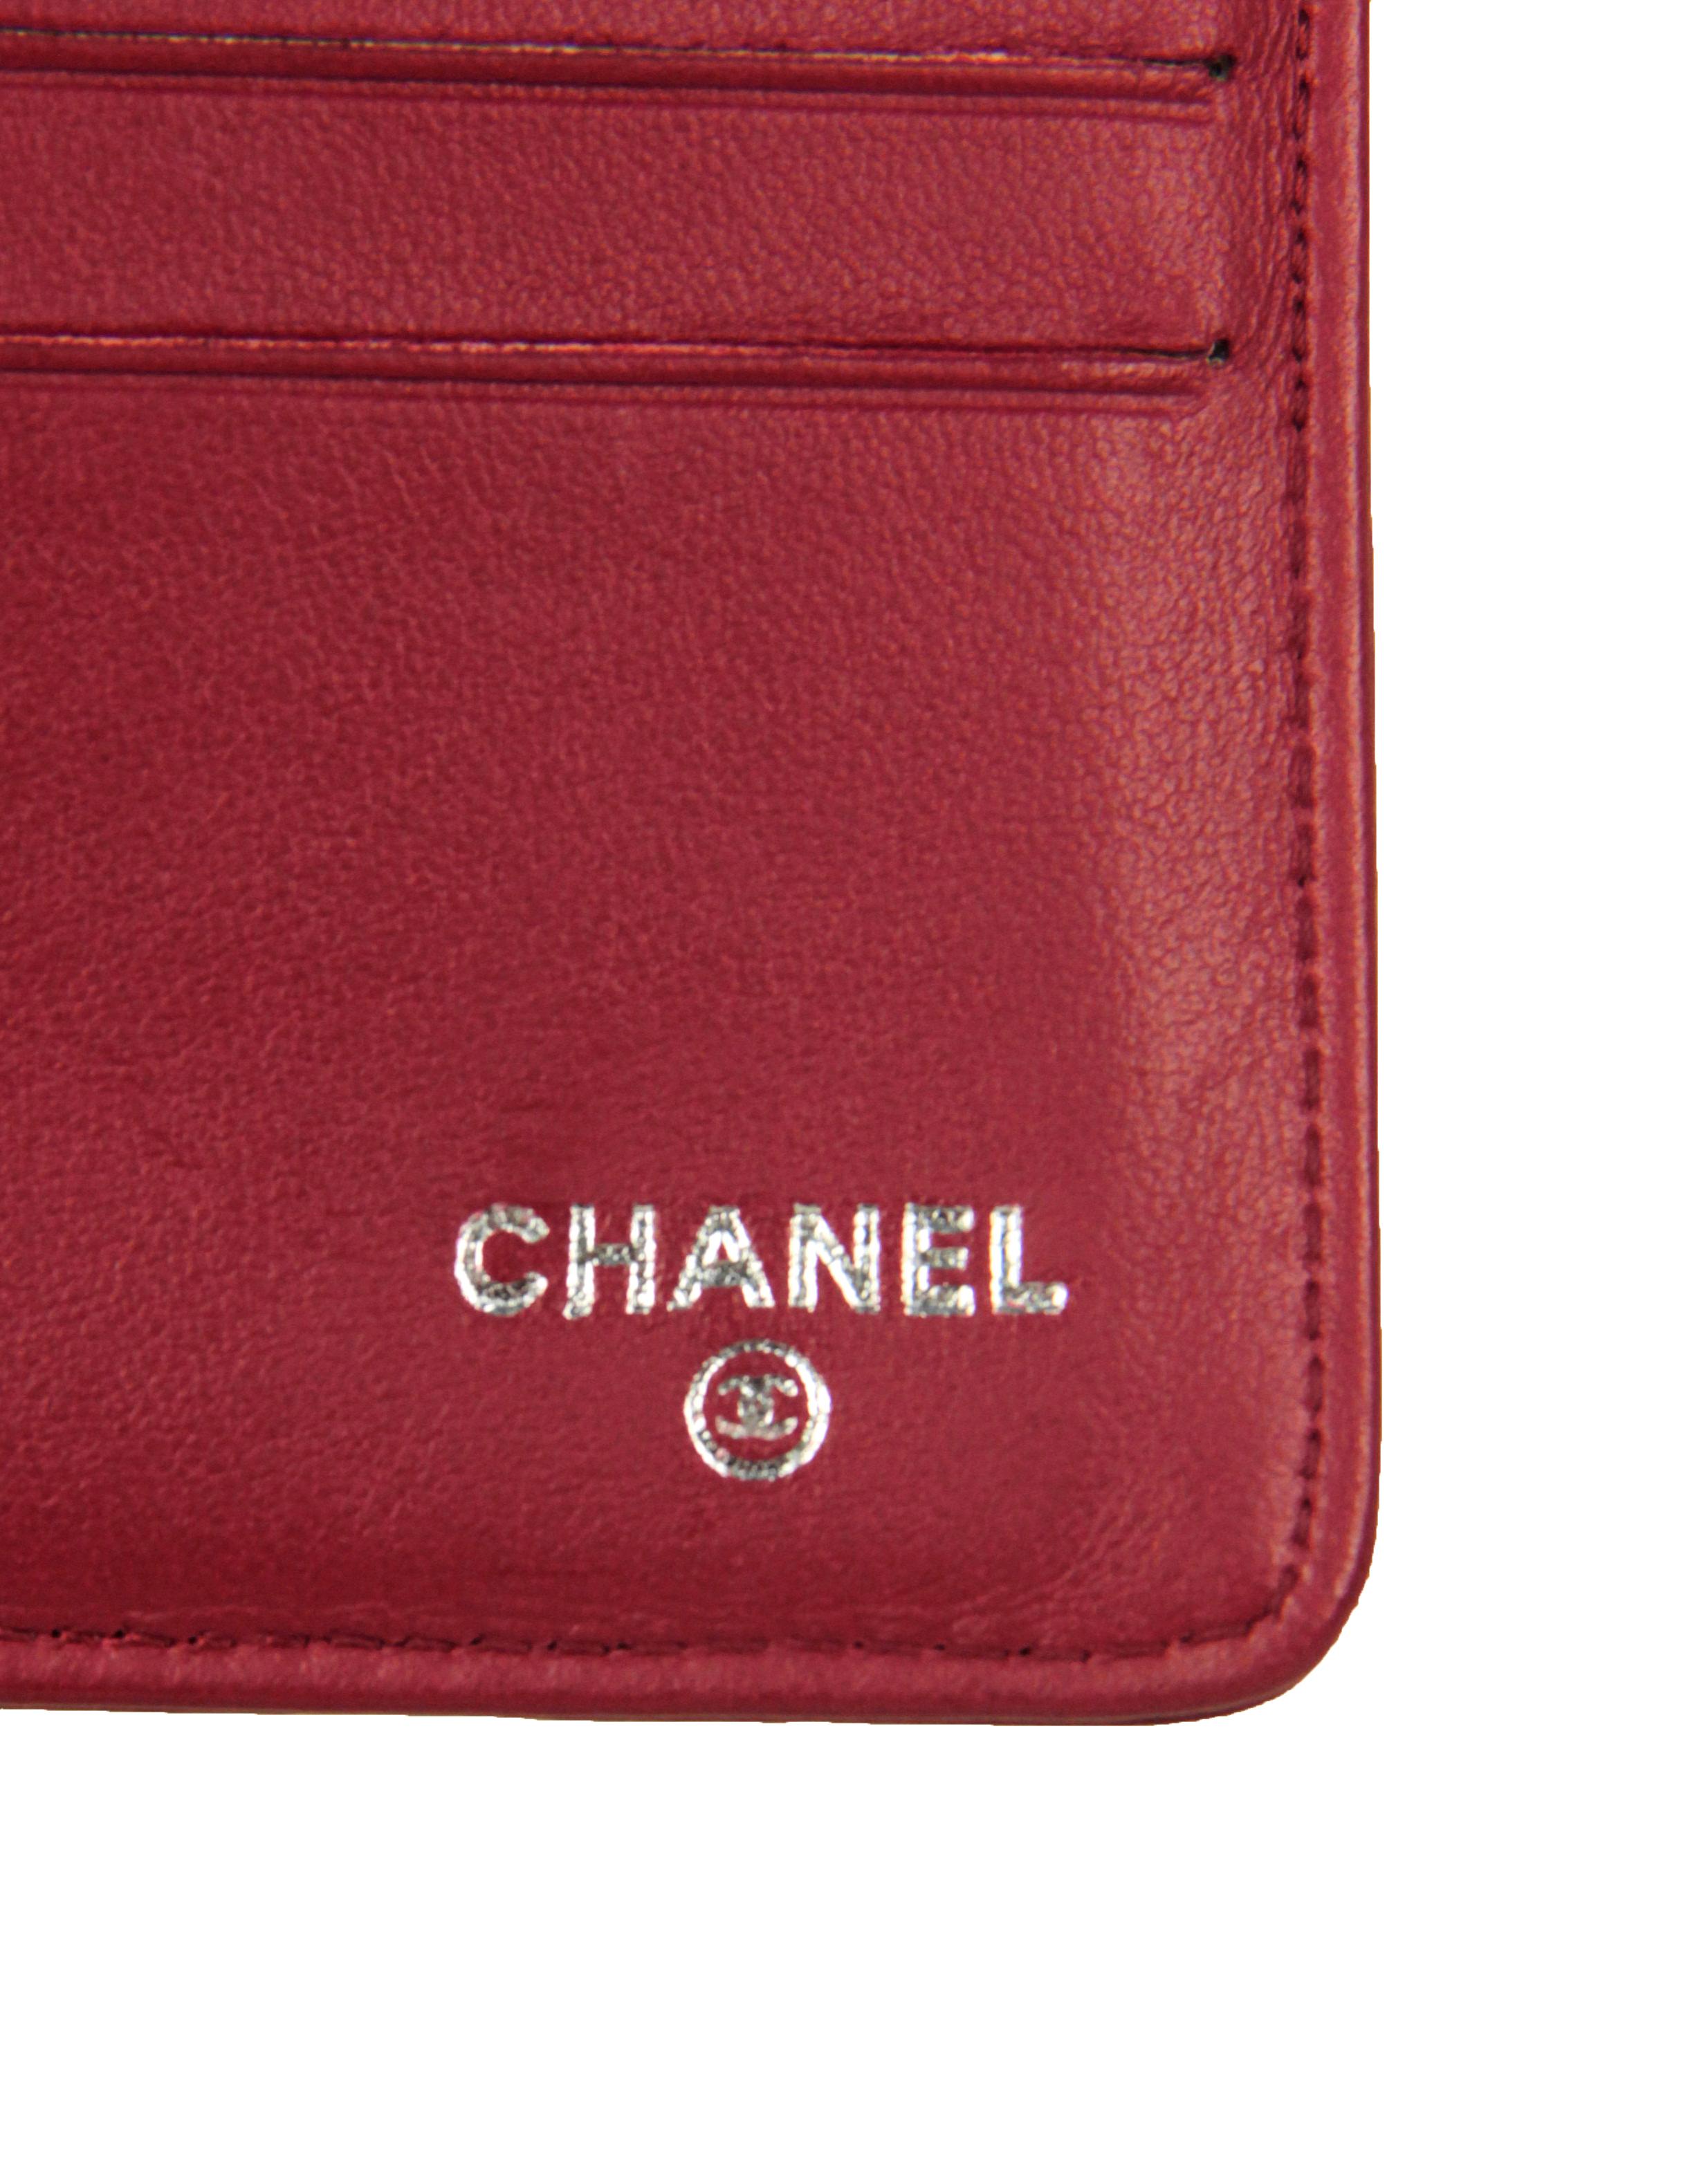 Chanel Red Leather Camelia Embossed Wallet 3